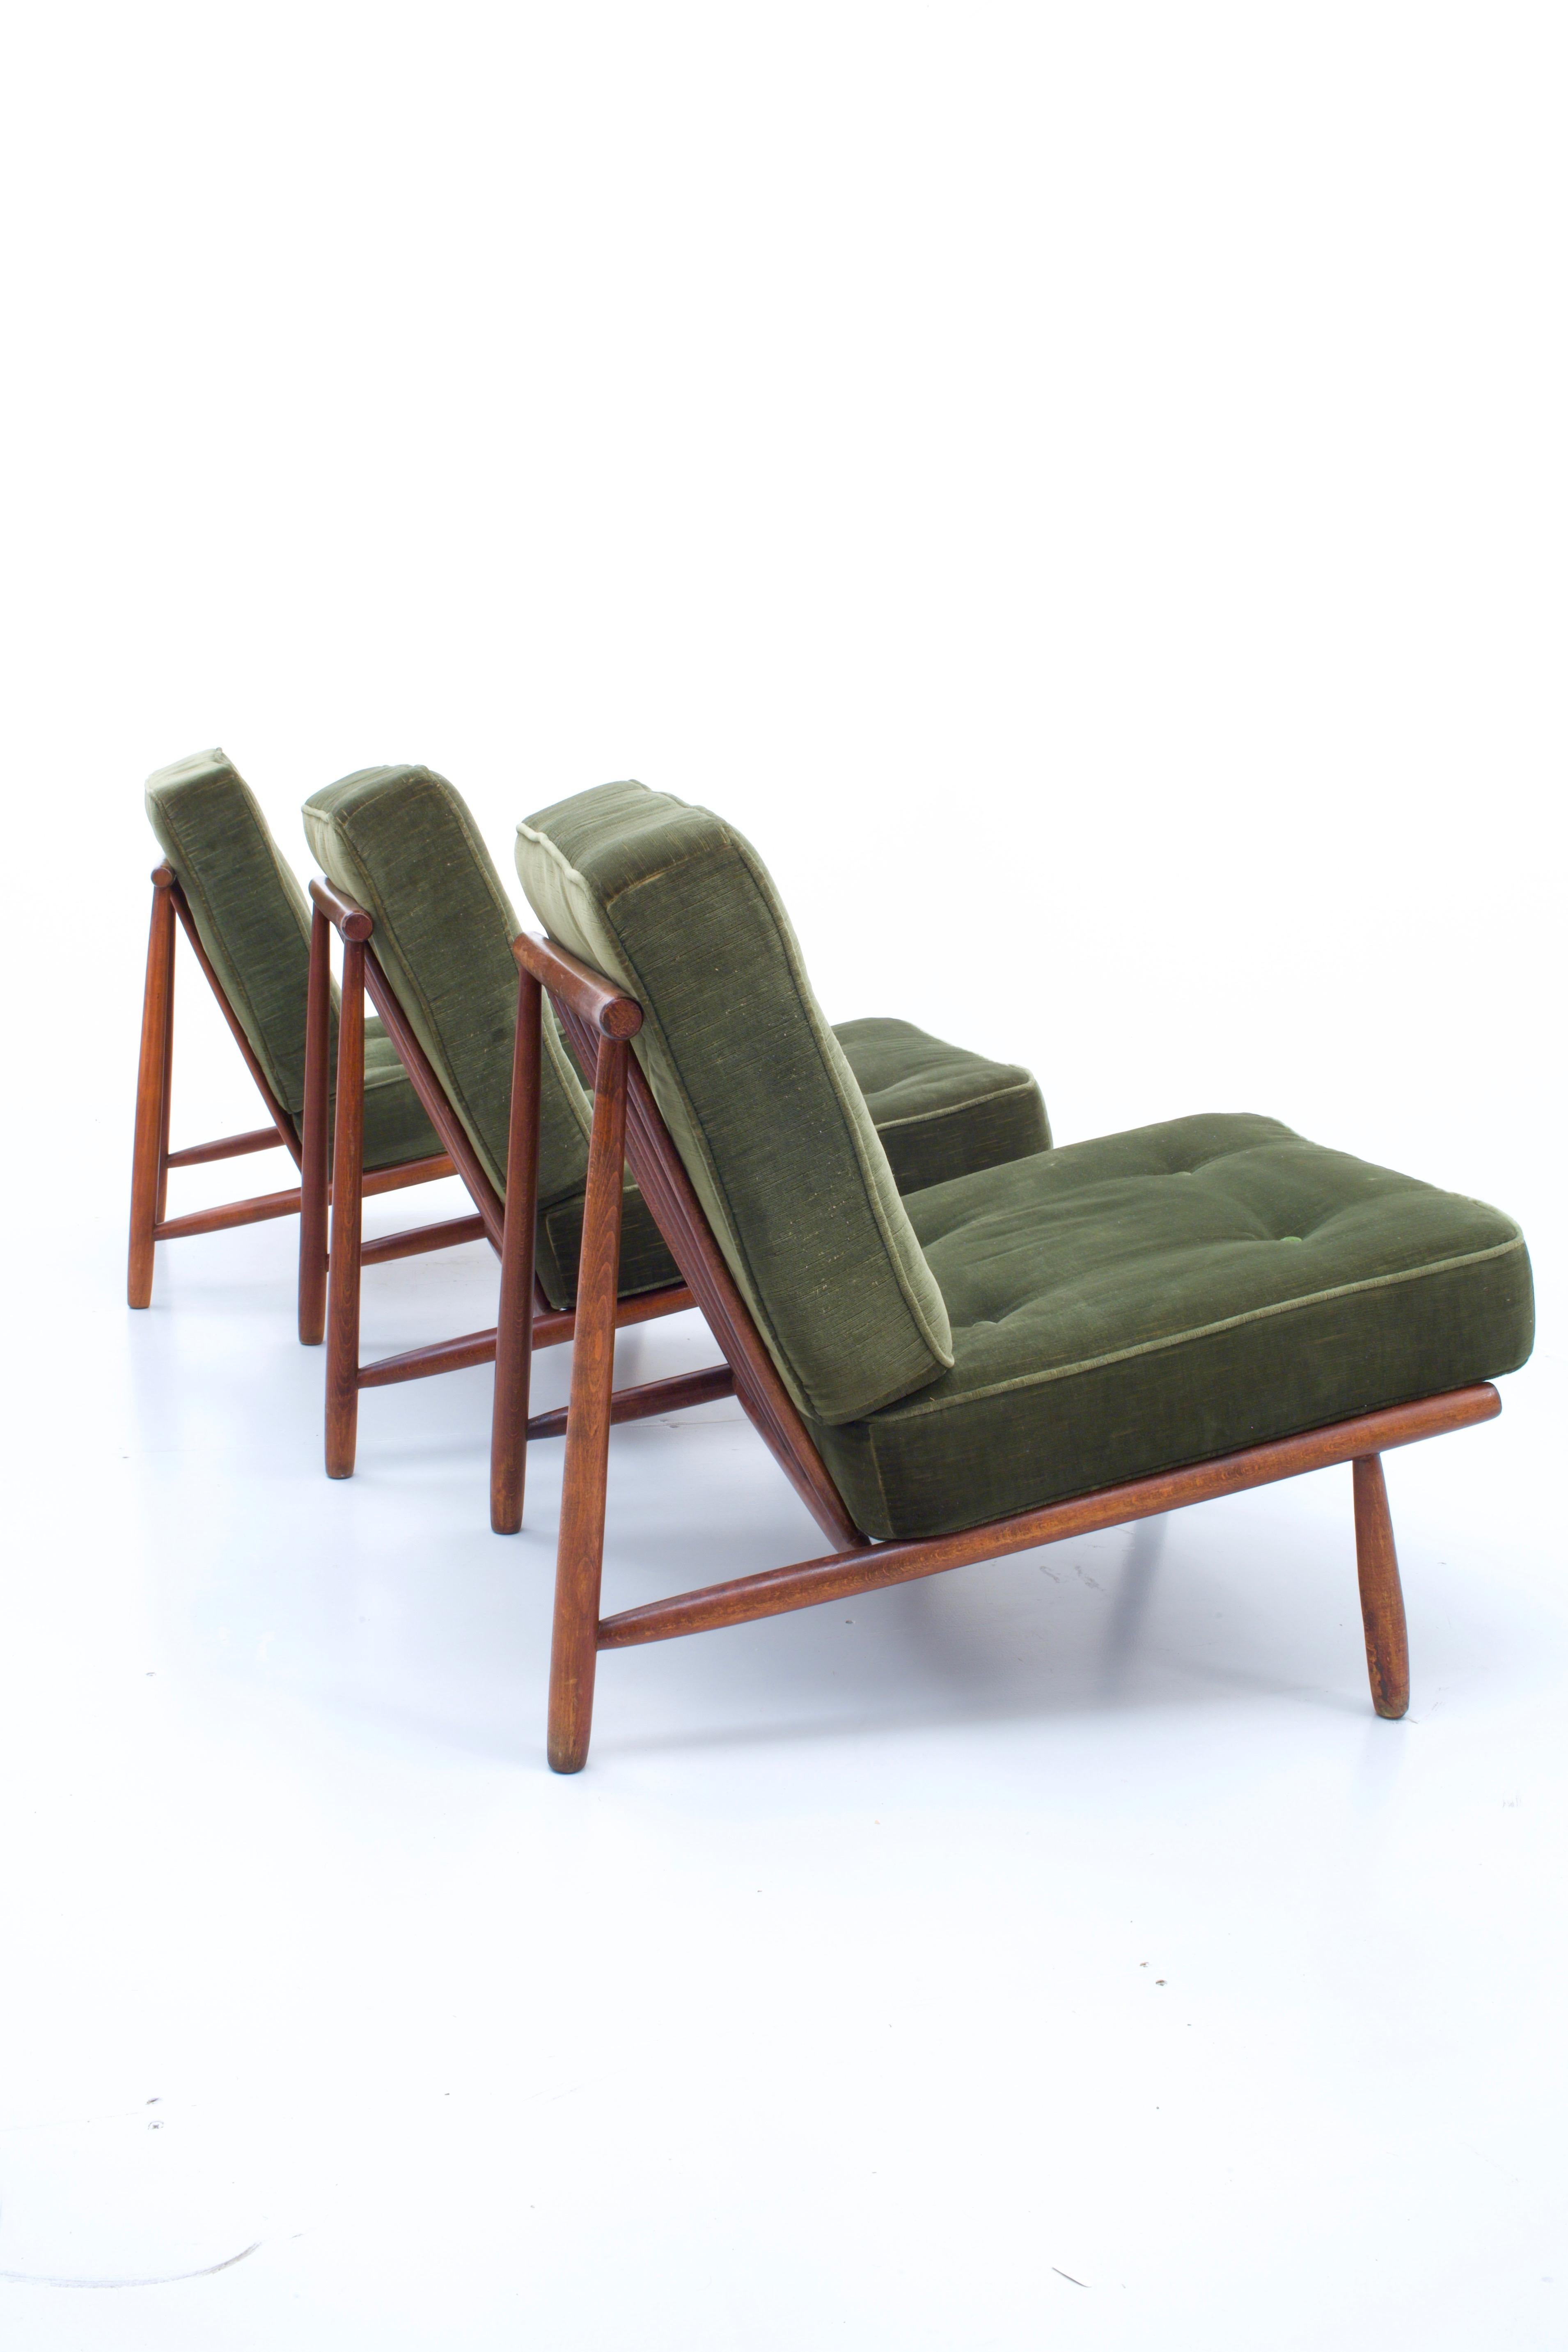 Swedish Set of three Lounge Chairs in Beech by Alf Svensson for DUX, Sweden, 1952